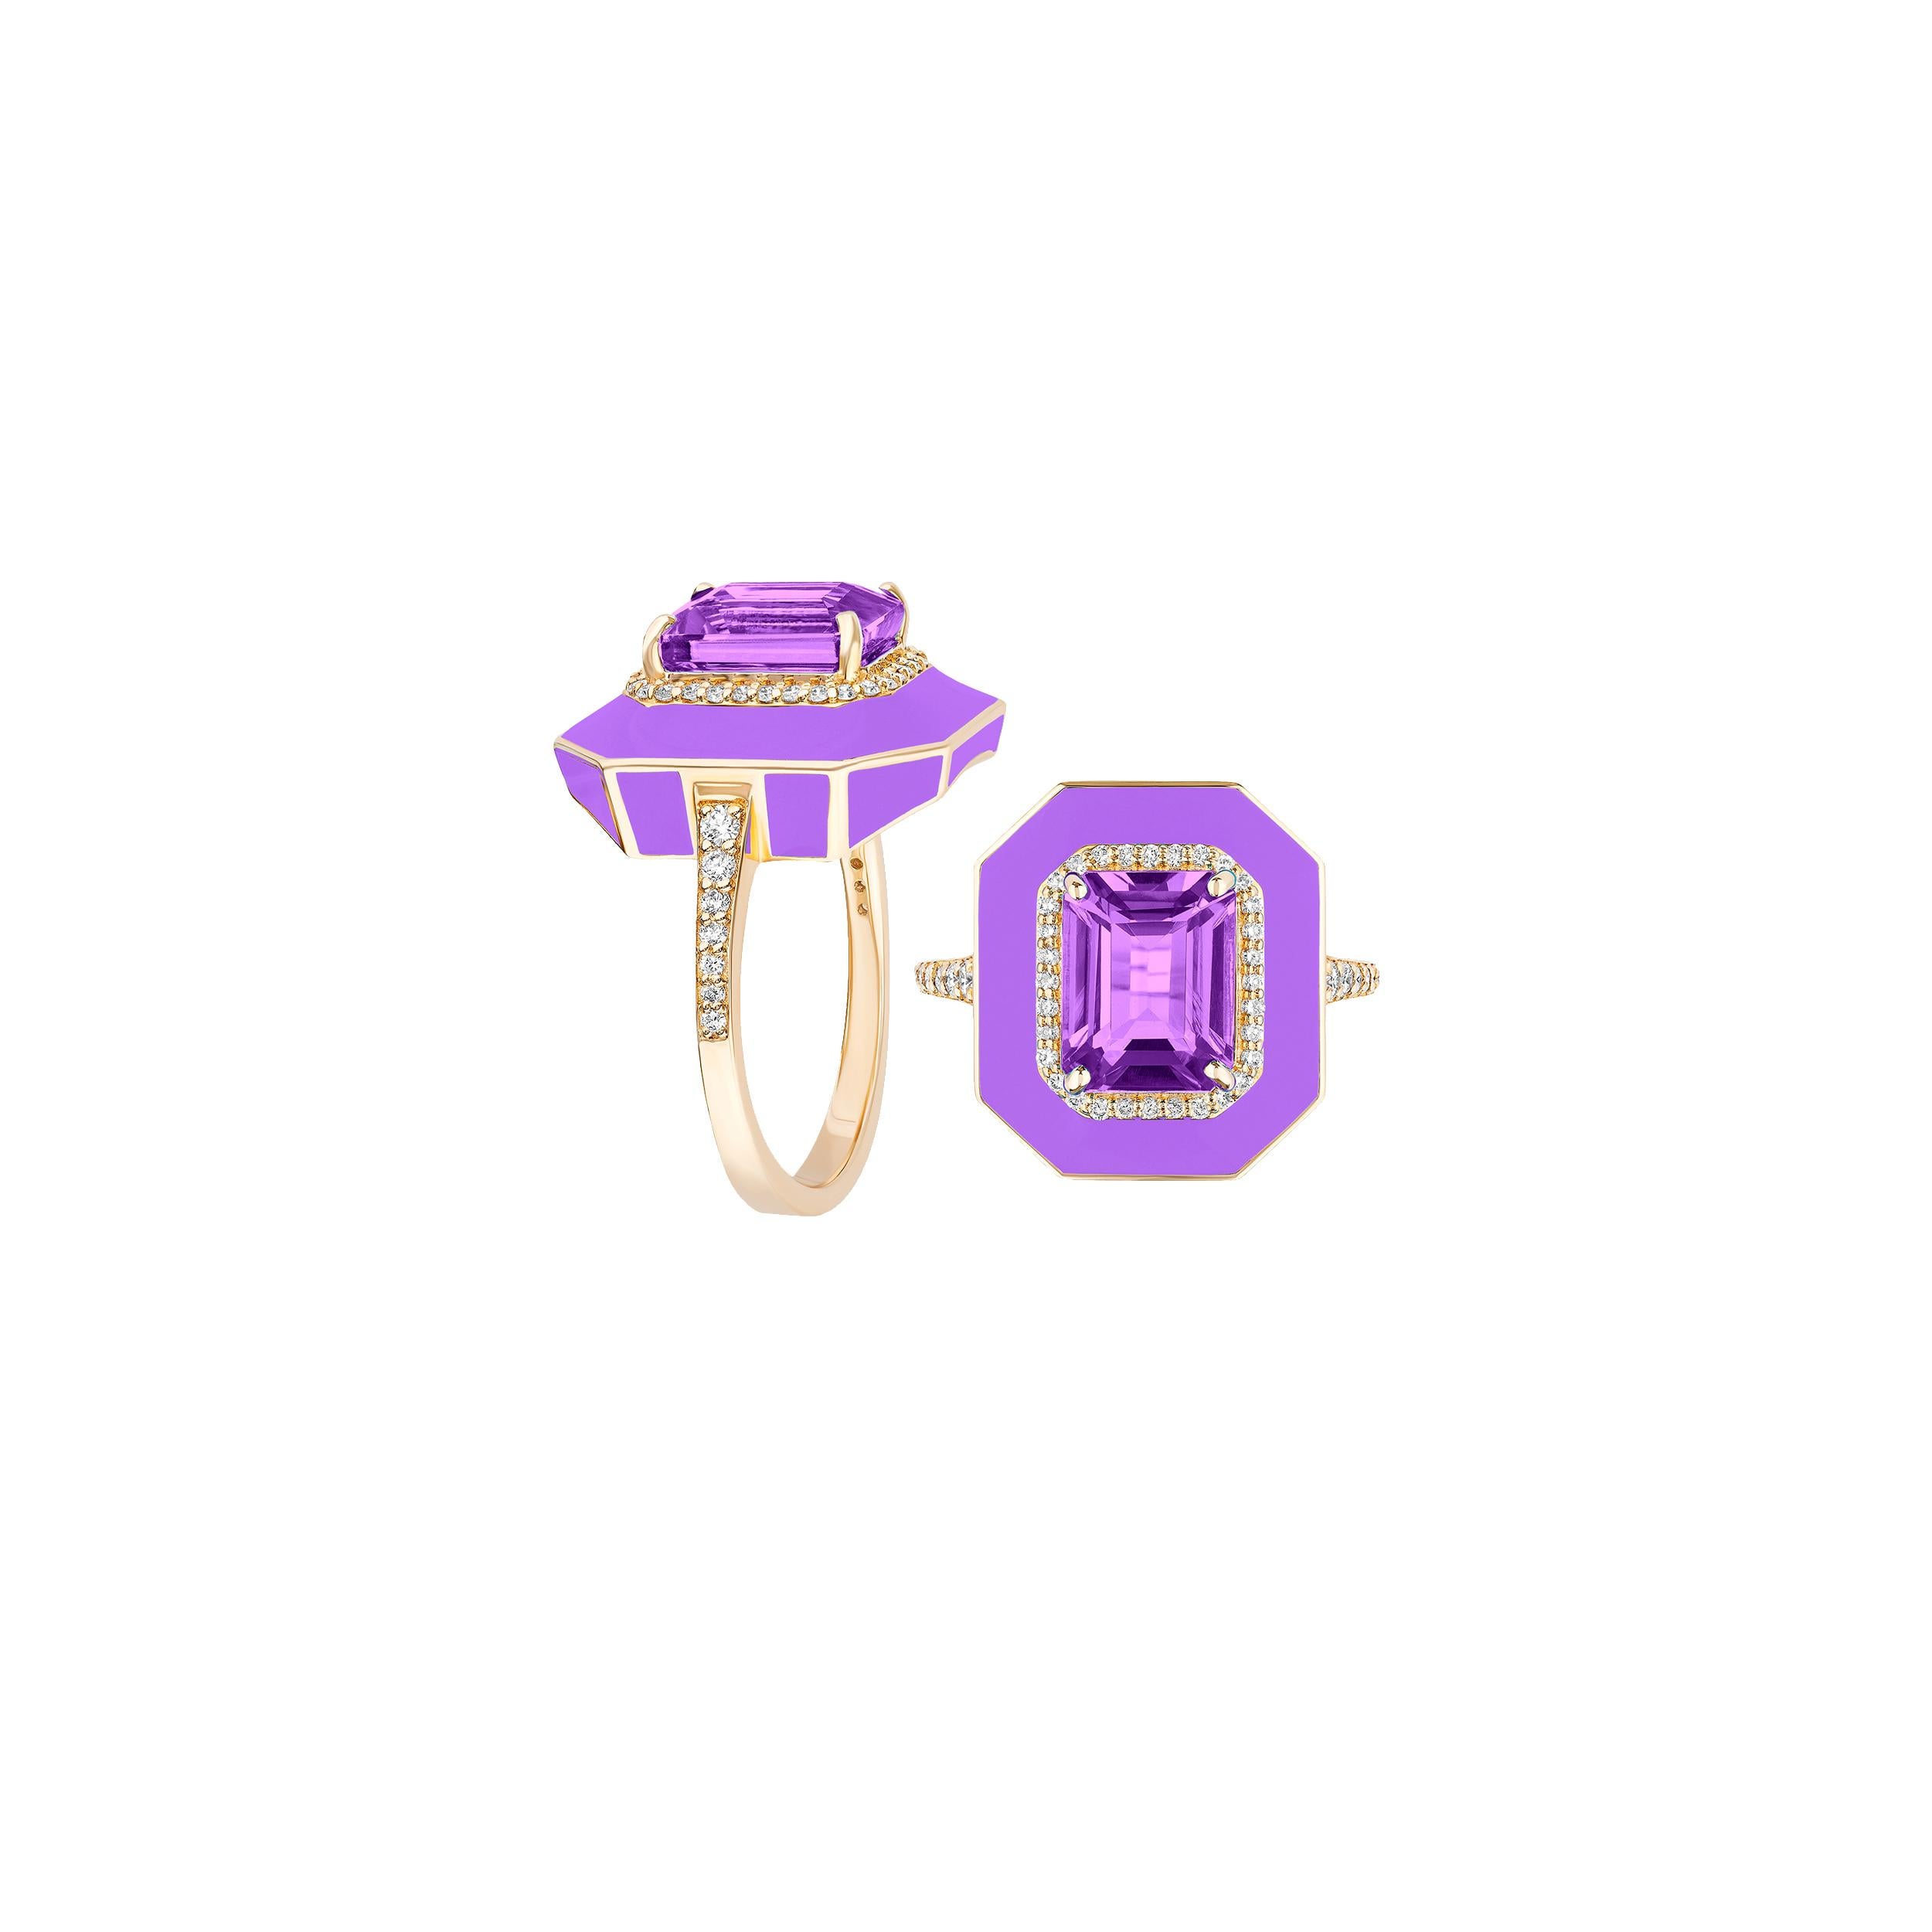 Amethyst Emerald Cut Ring with Diamonds and Purple Enamel in 18K Yellow Gold, from 'Queen' Collection. Our Queen Collection was inspired by royalty, but with a modern twist. The combination of enamel and Amethyst represents power, richness and